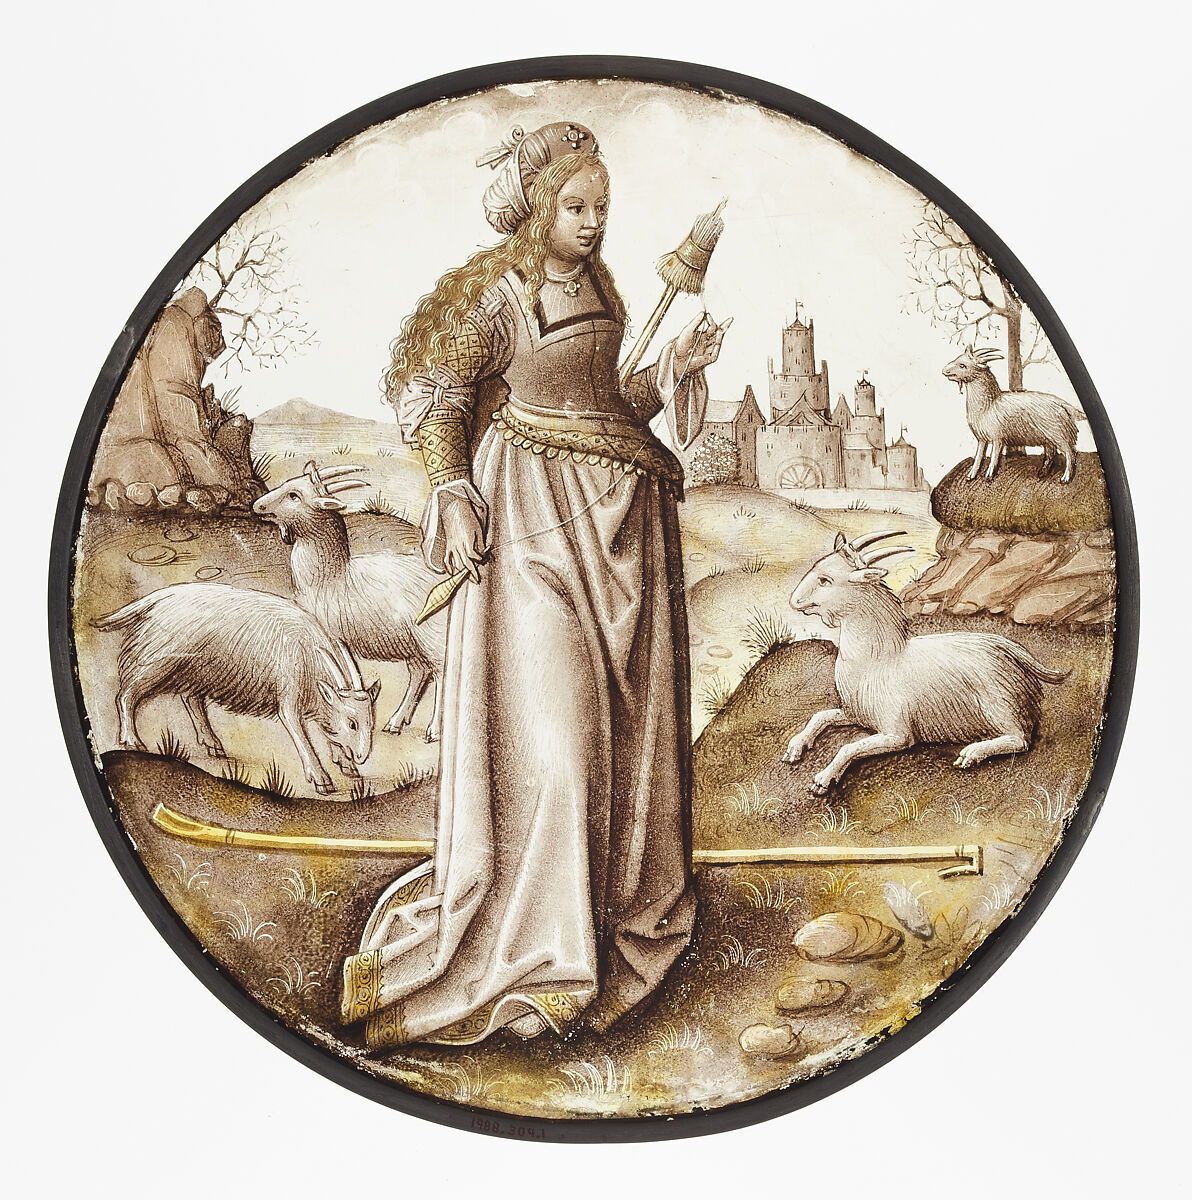 Roundel with Allegorical Figure, Colorless glass, vitreous paint and silver stain, South Netherlandish